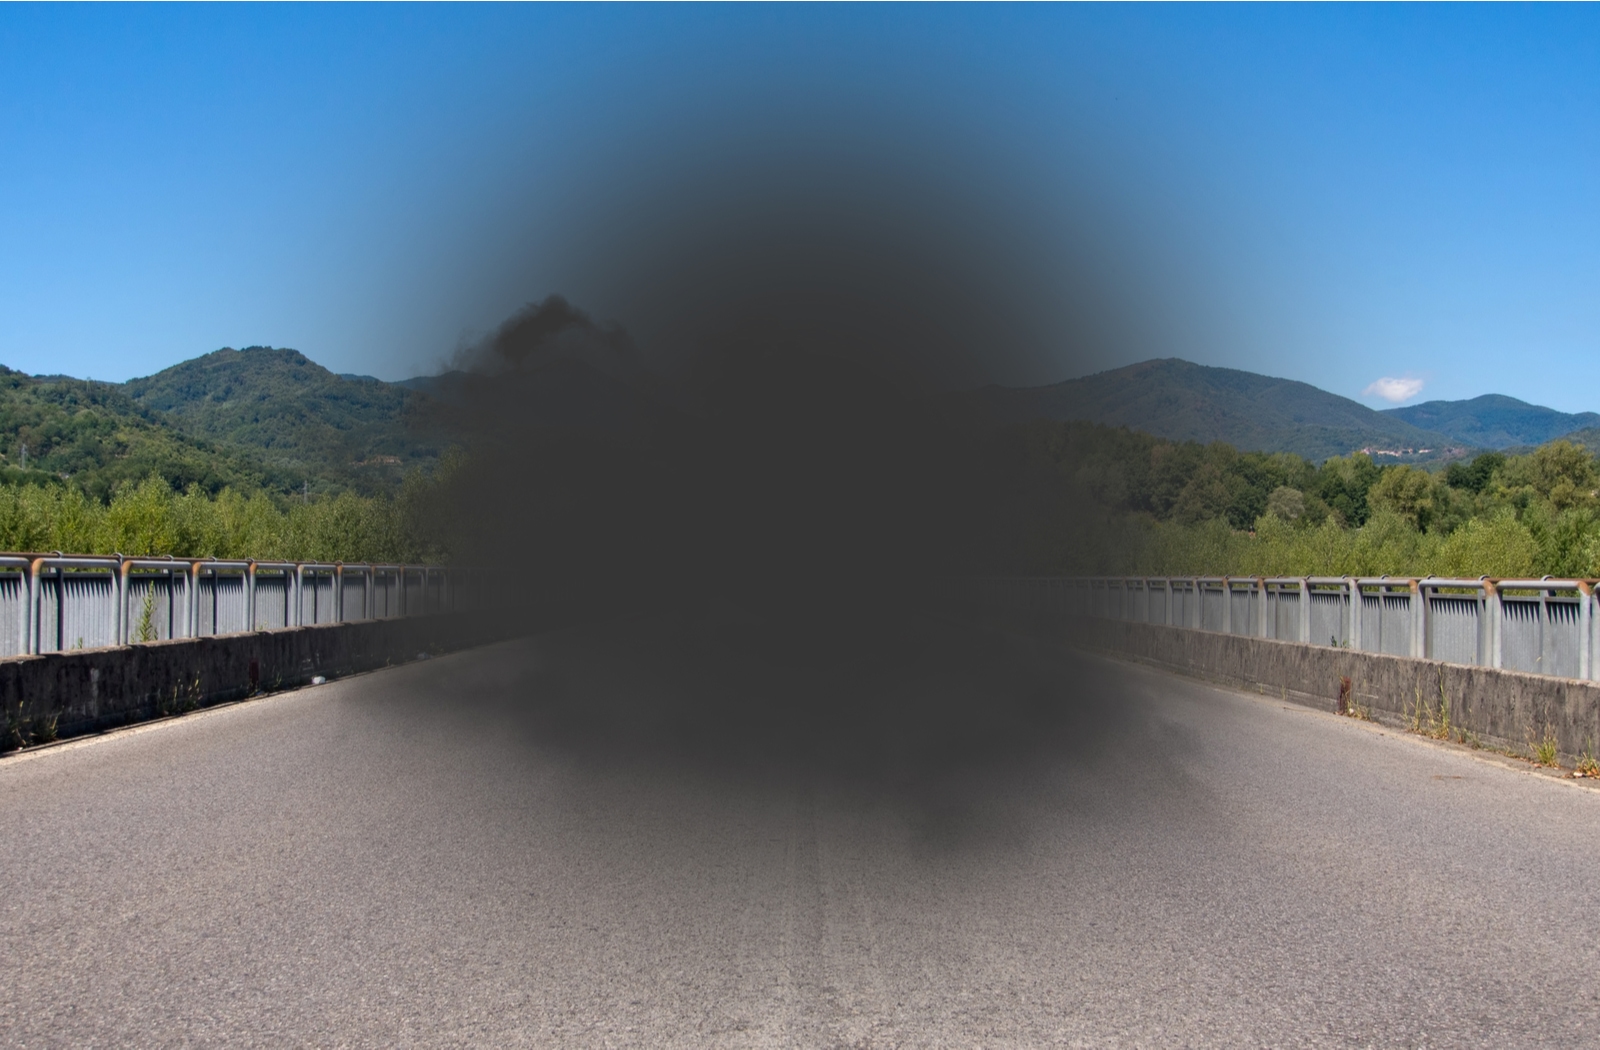 A view through the eyes of someone with macular degeneration, looking down a roadway with a large, dark, visionless spot in the middle